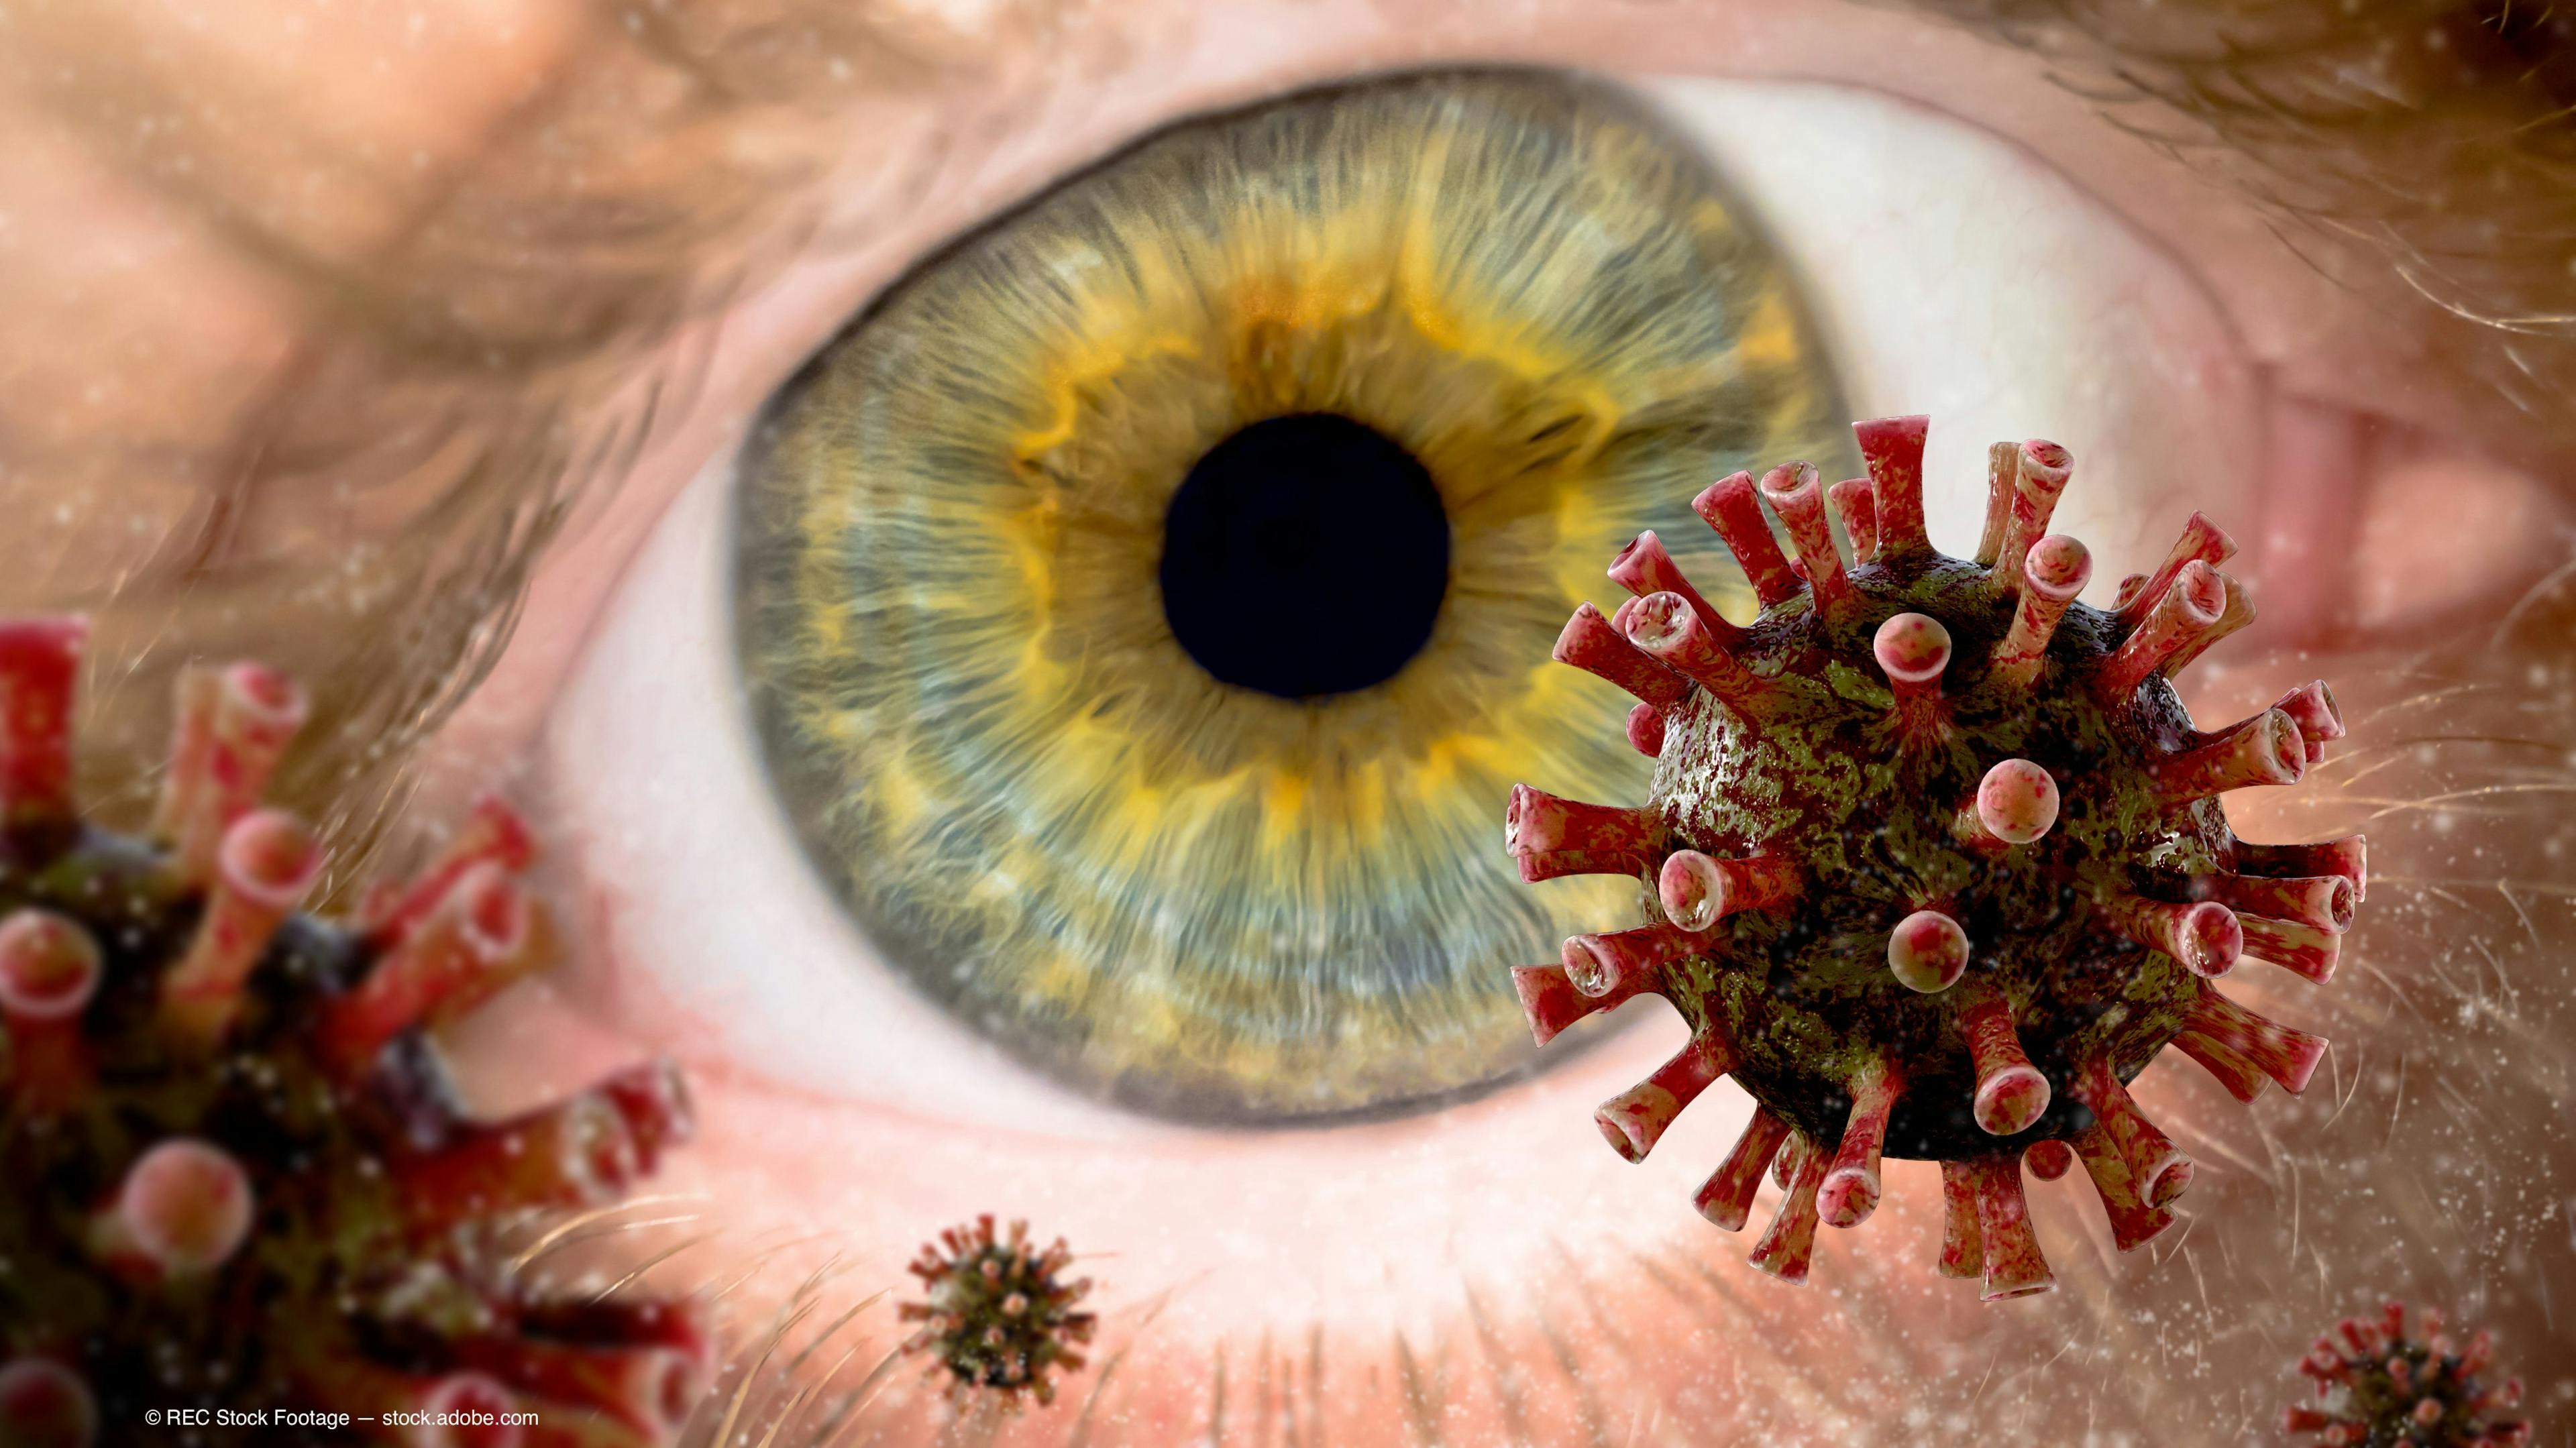 Investigators study ocular adverse events linked to inactivated COVID-19 vaccine